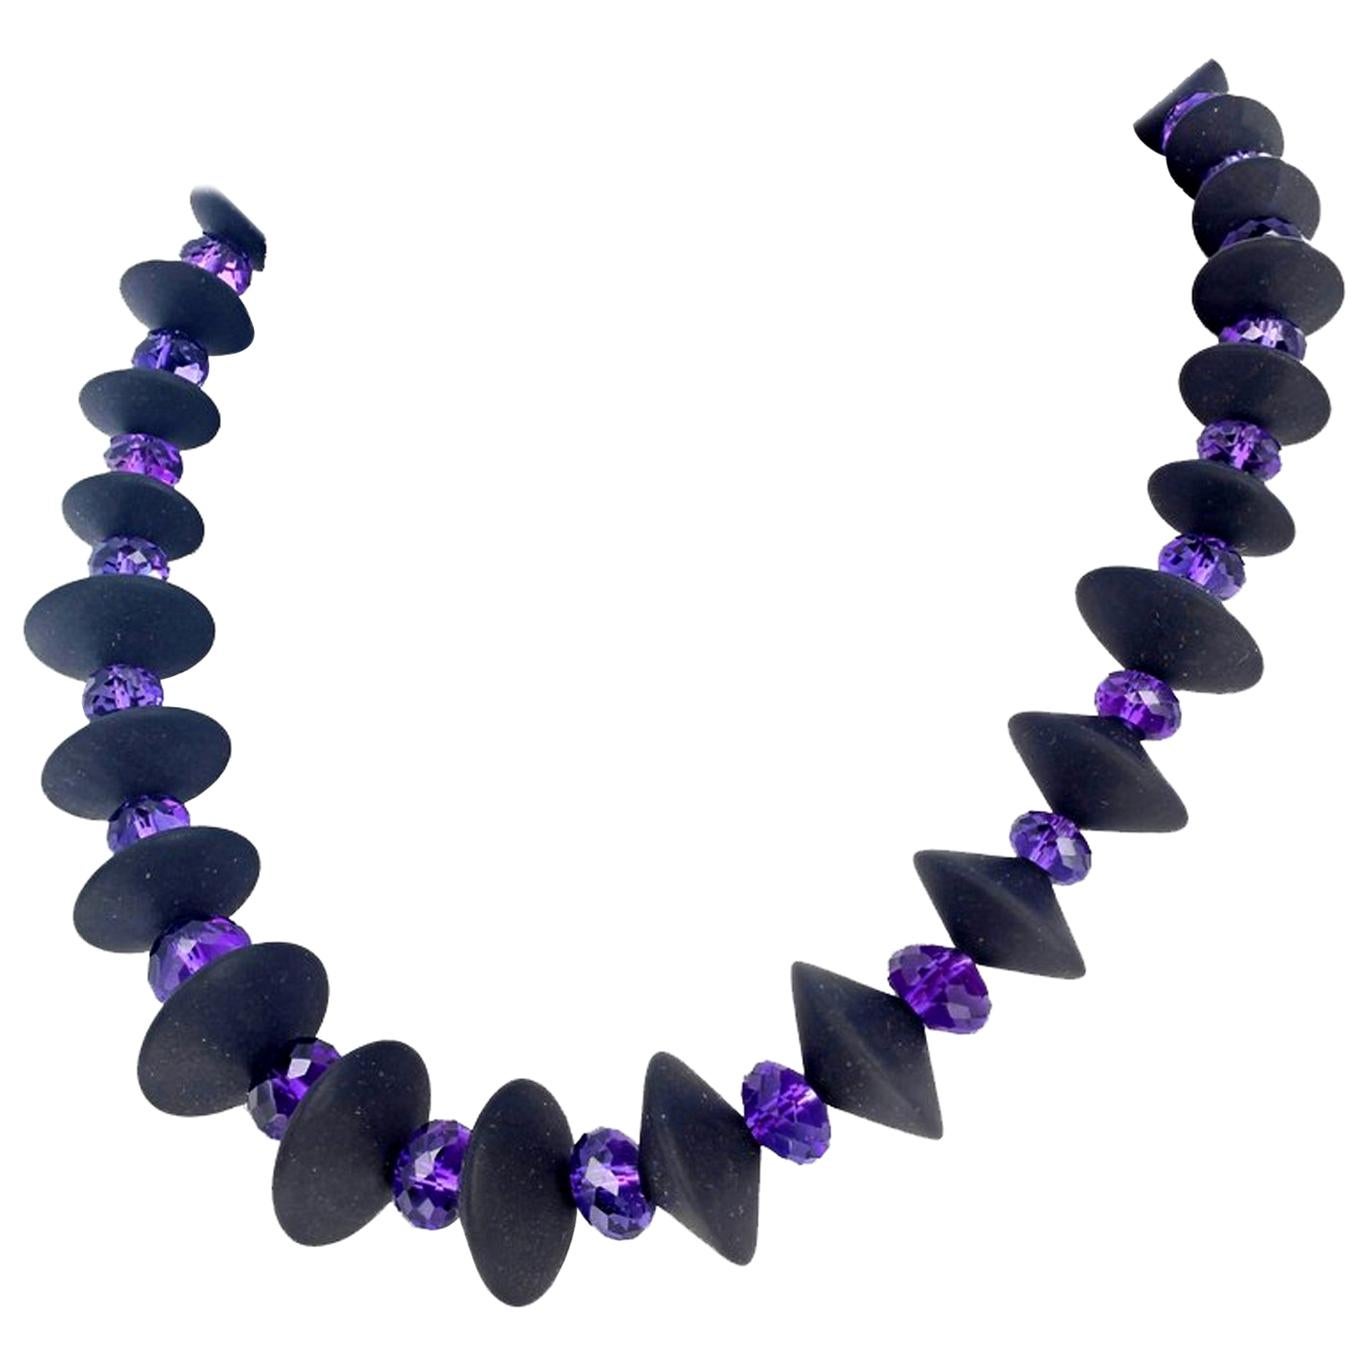 AJD Art Deco Inspired Black Onyx and Sparkling Purple Amethyst Necklace